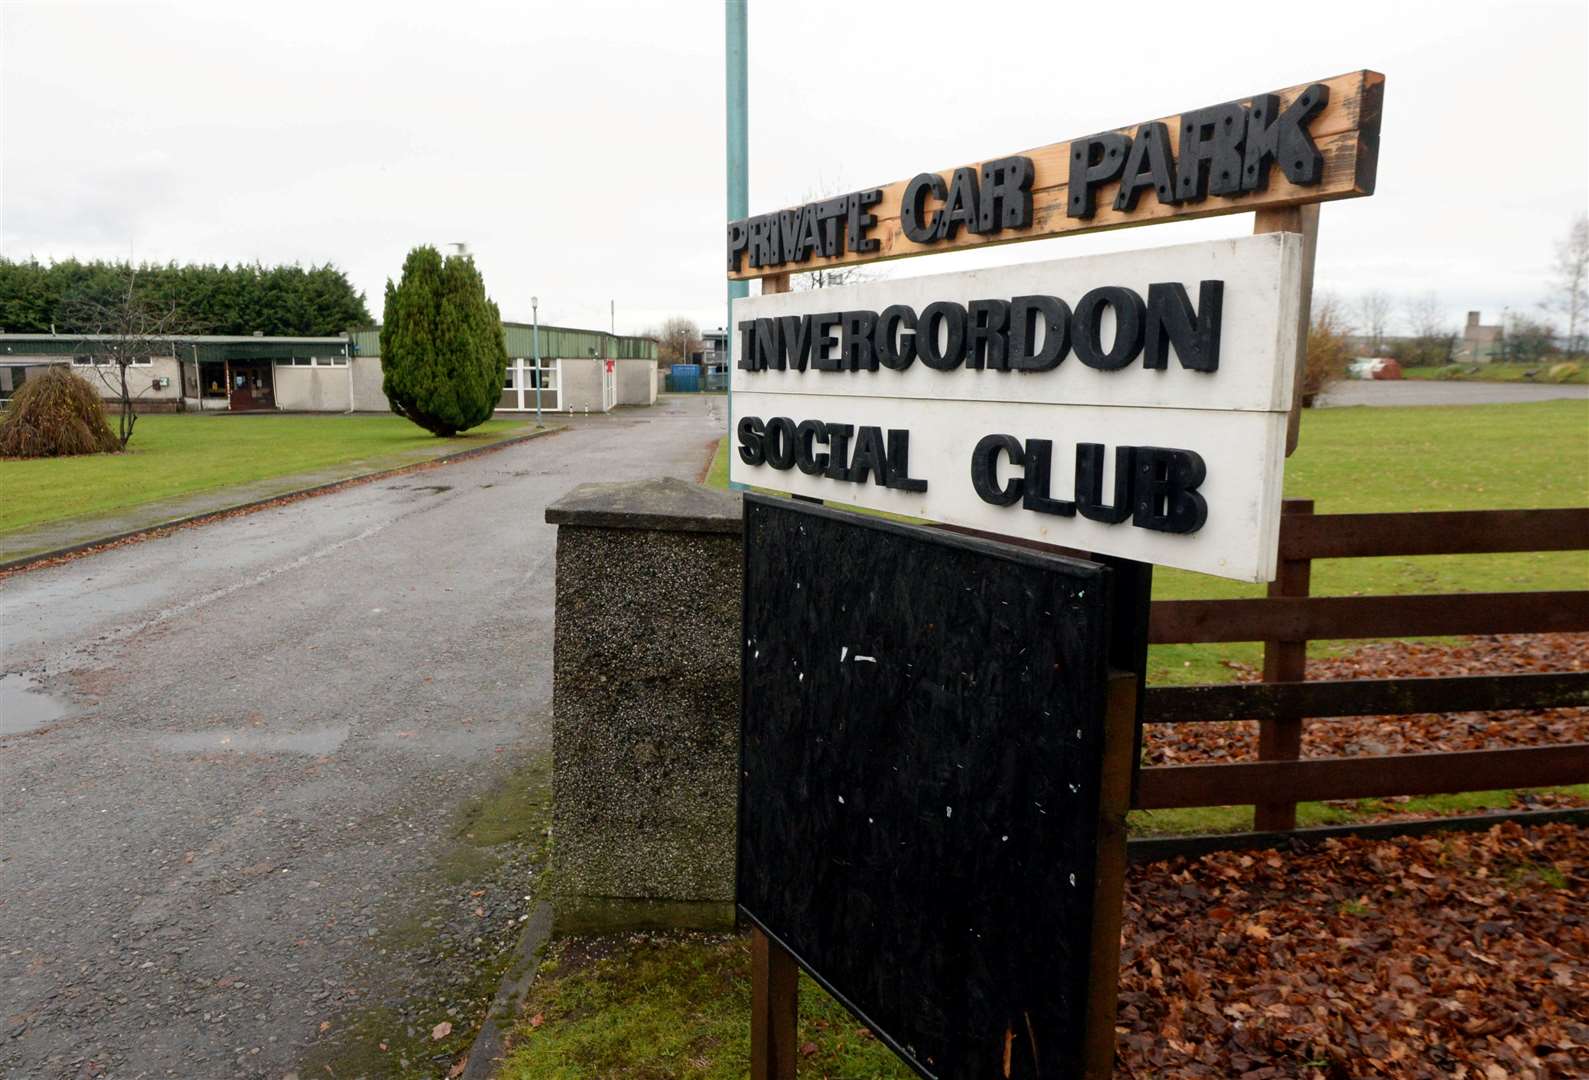 Invergordon Social Club is hosting drop-in clinics this week on Monday and Tuesday. Picture: James Mackenzie